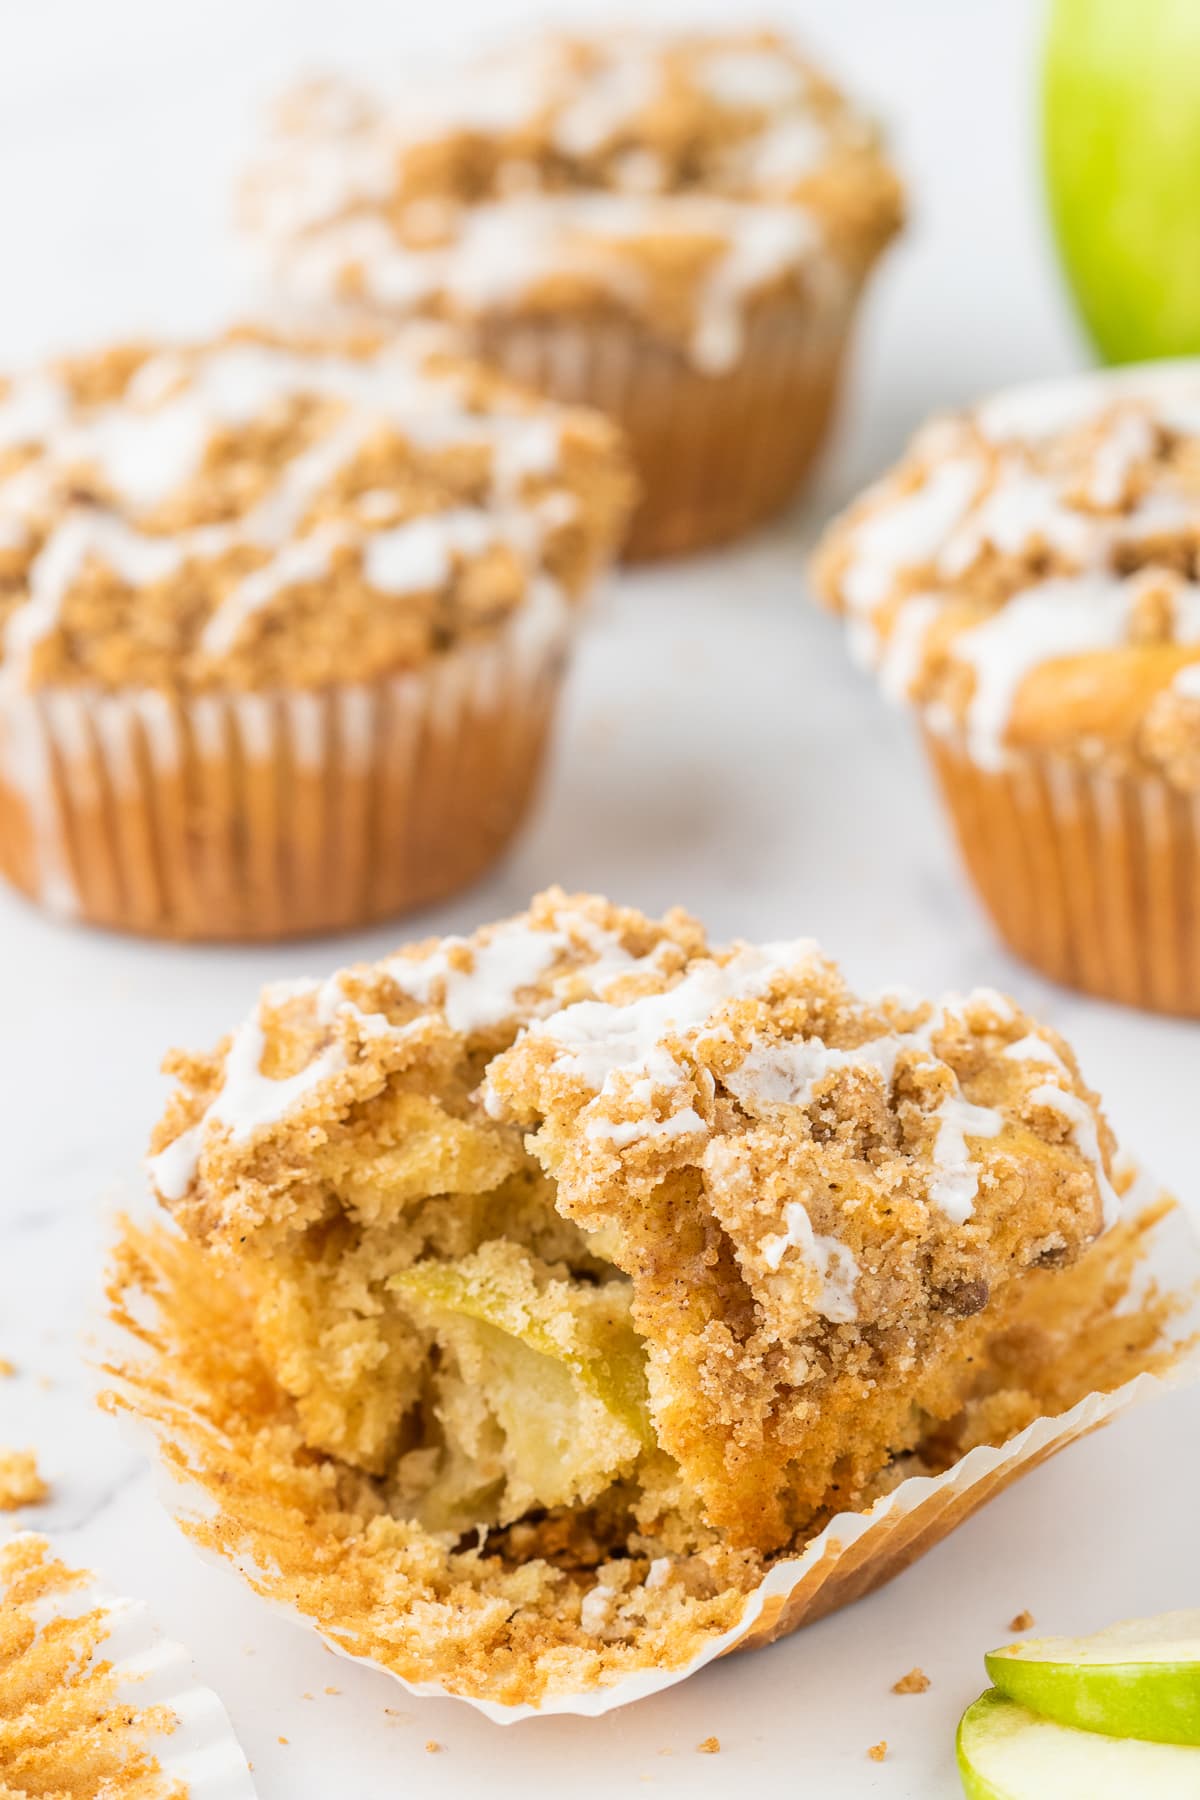 An apple cinnamon muffin with a bite missing to show the apples inside